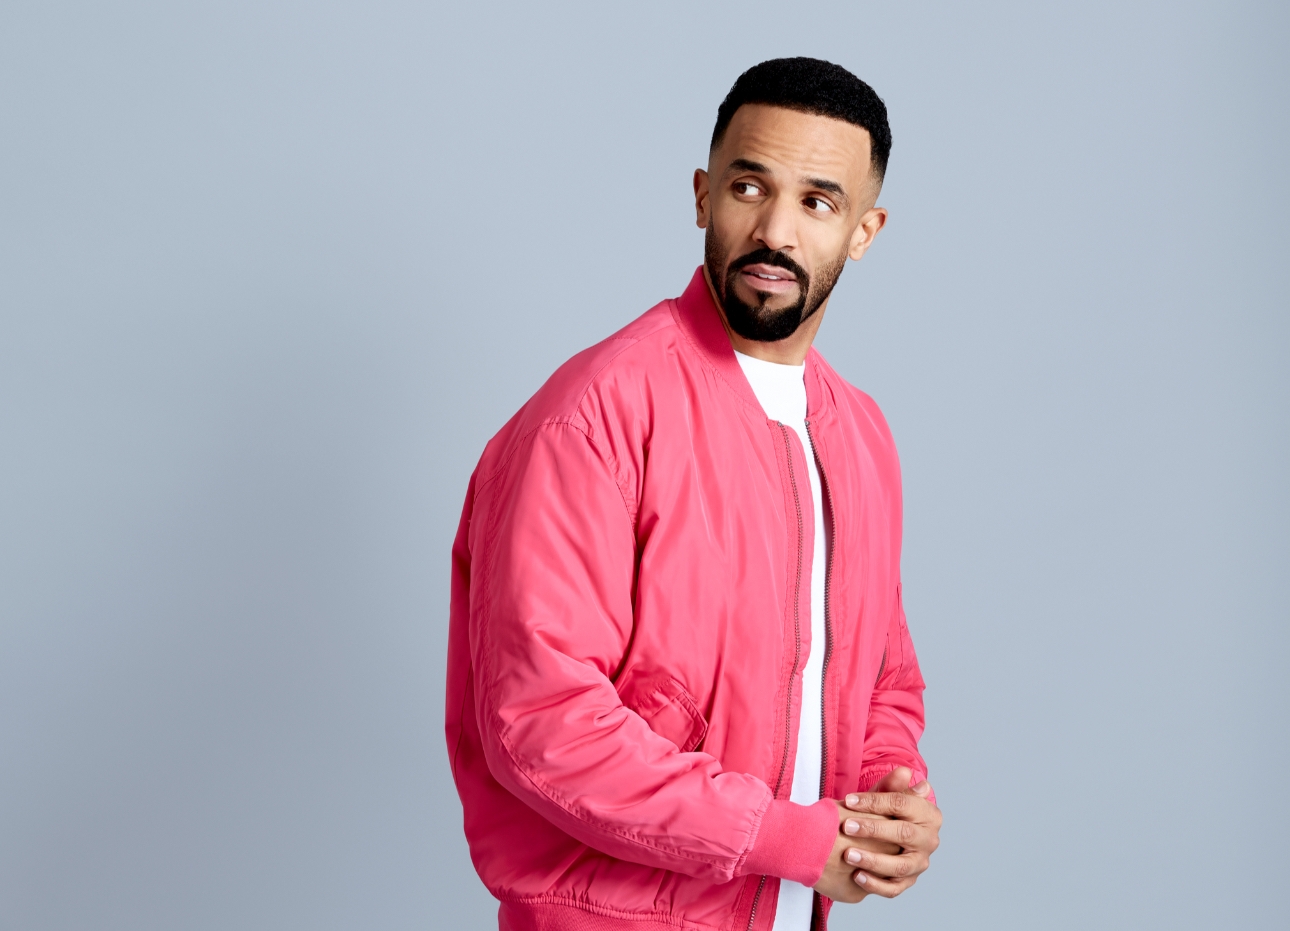 Singer Craig David who is set to appear at the Henley Festival this July